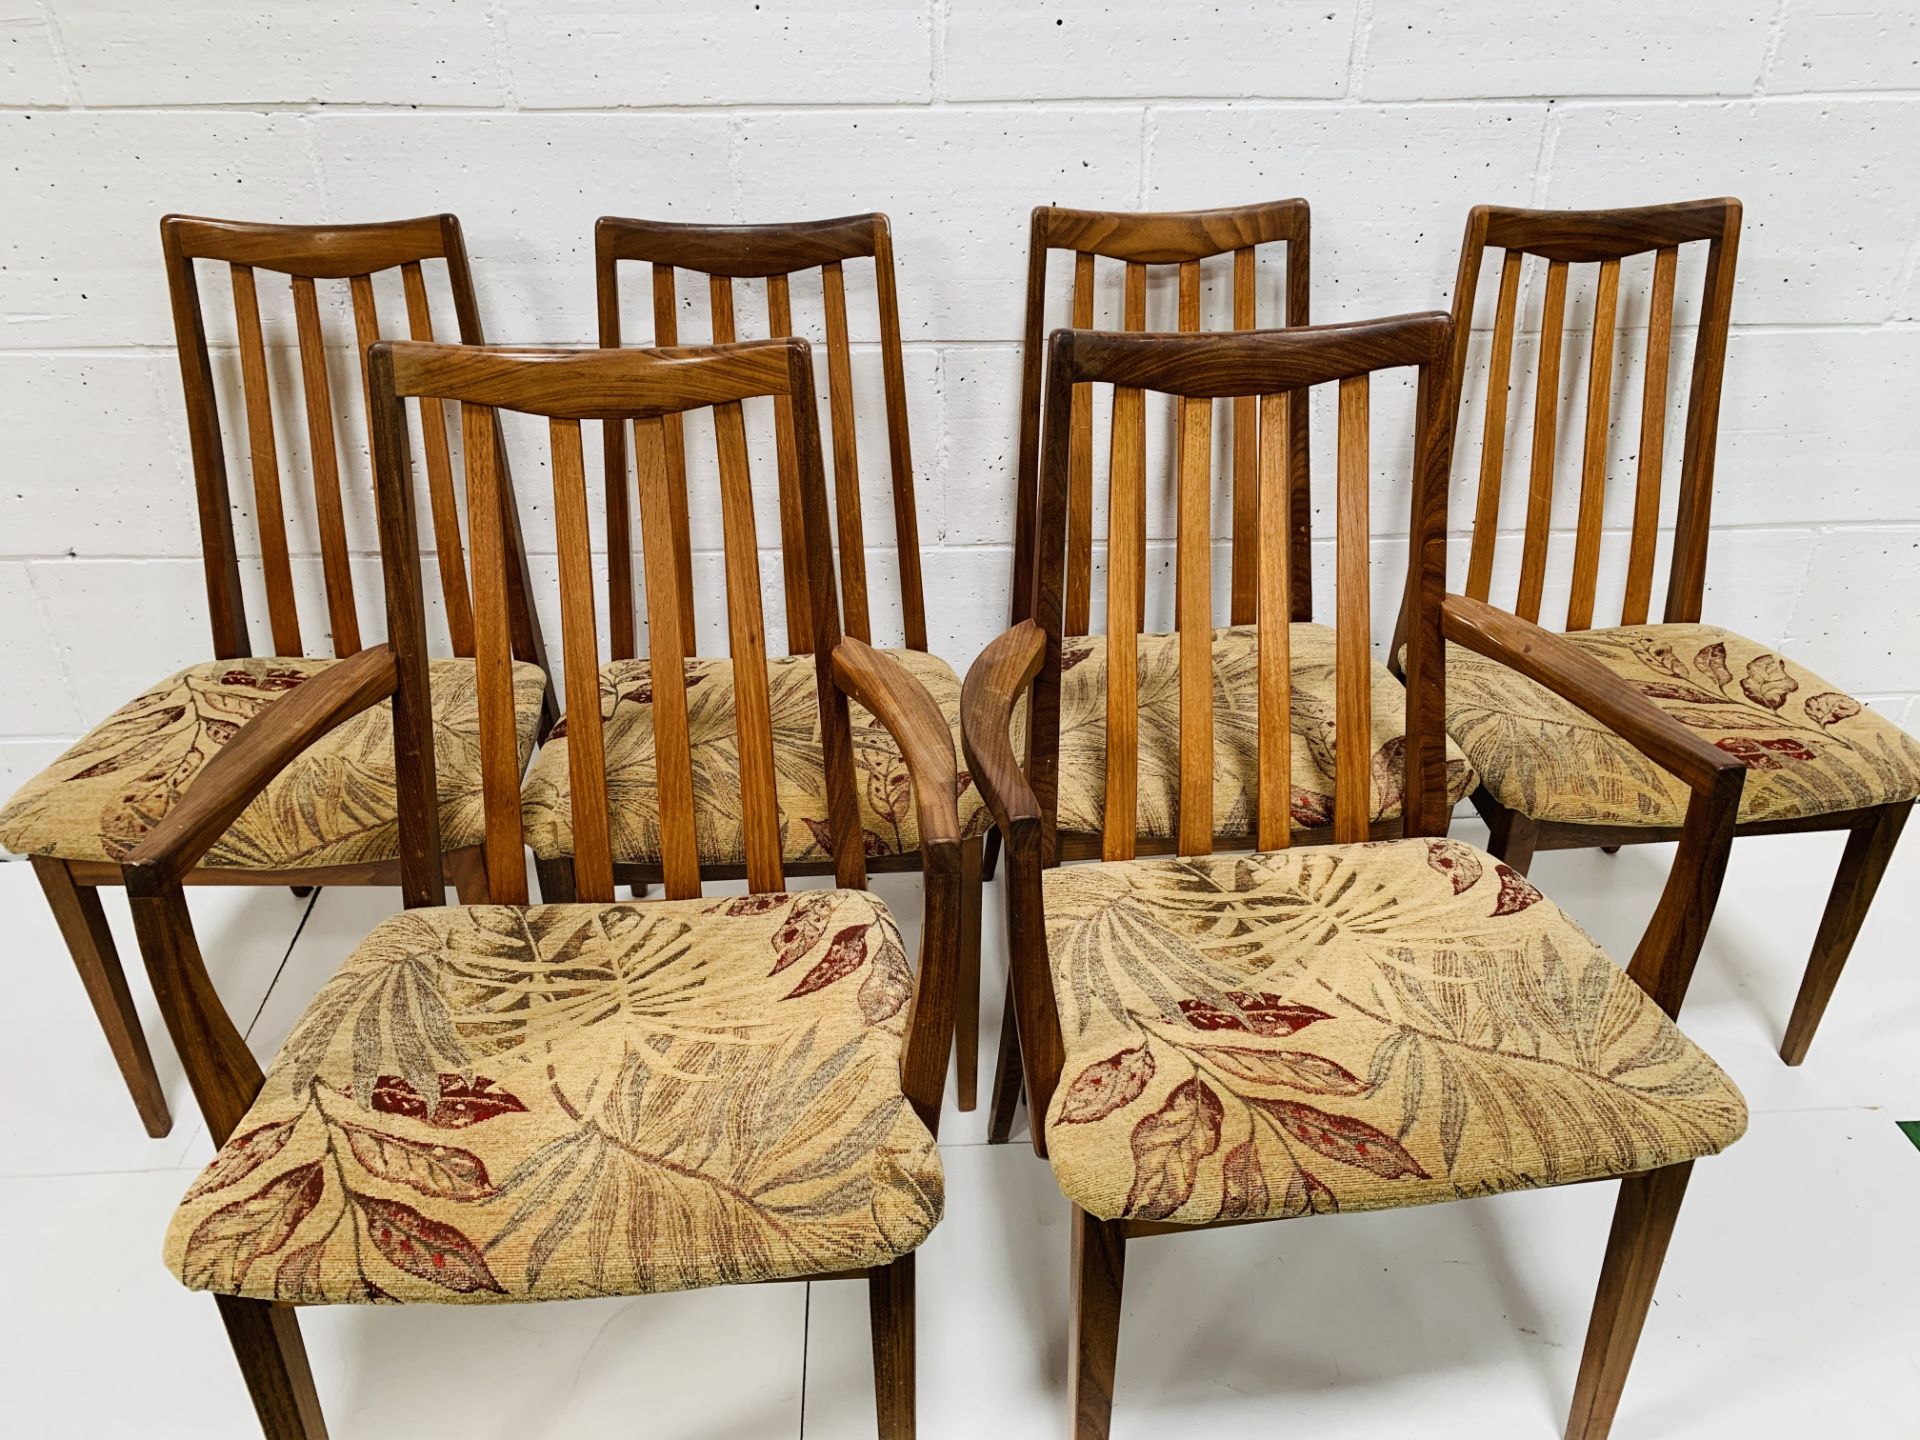 Set of 6 G-Plan chairs, including 2 carvers